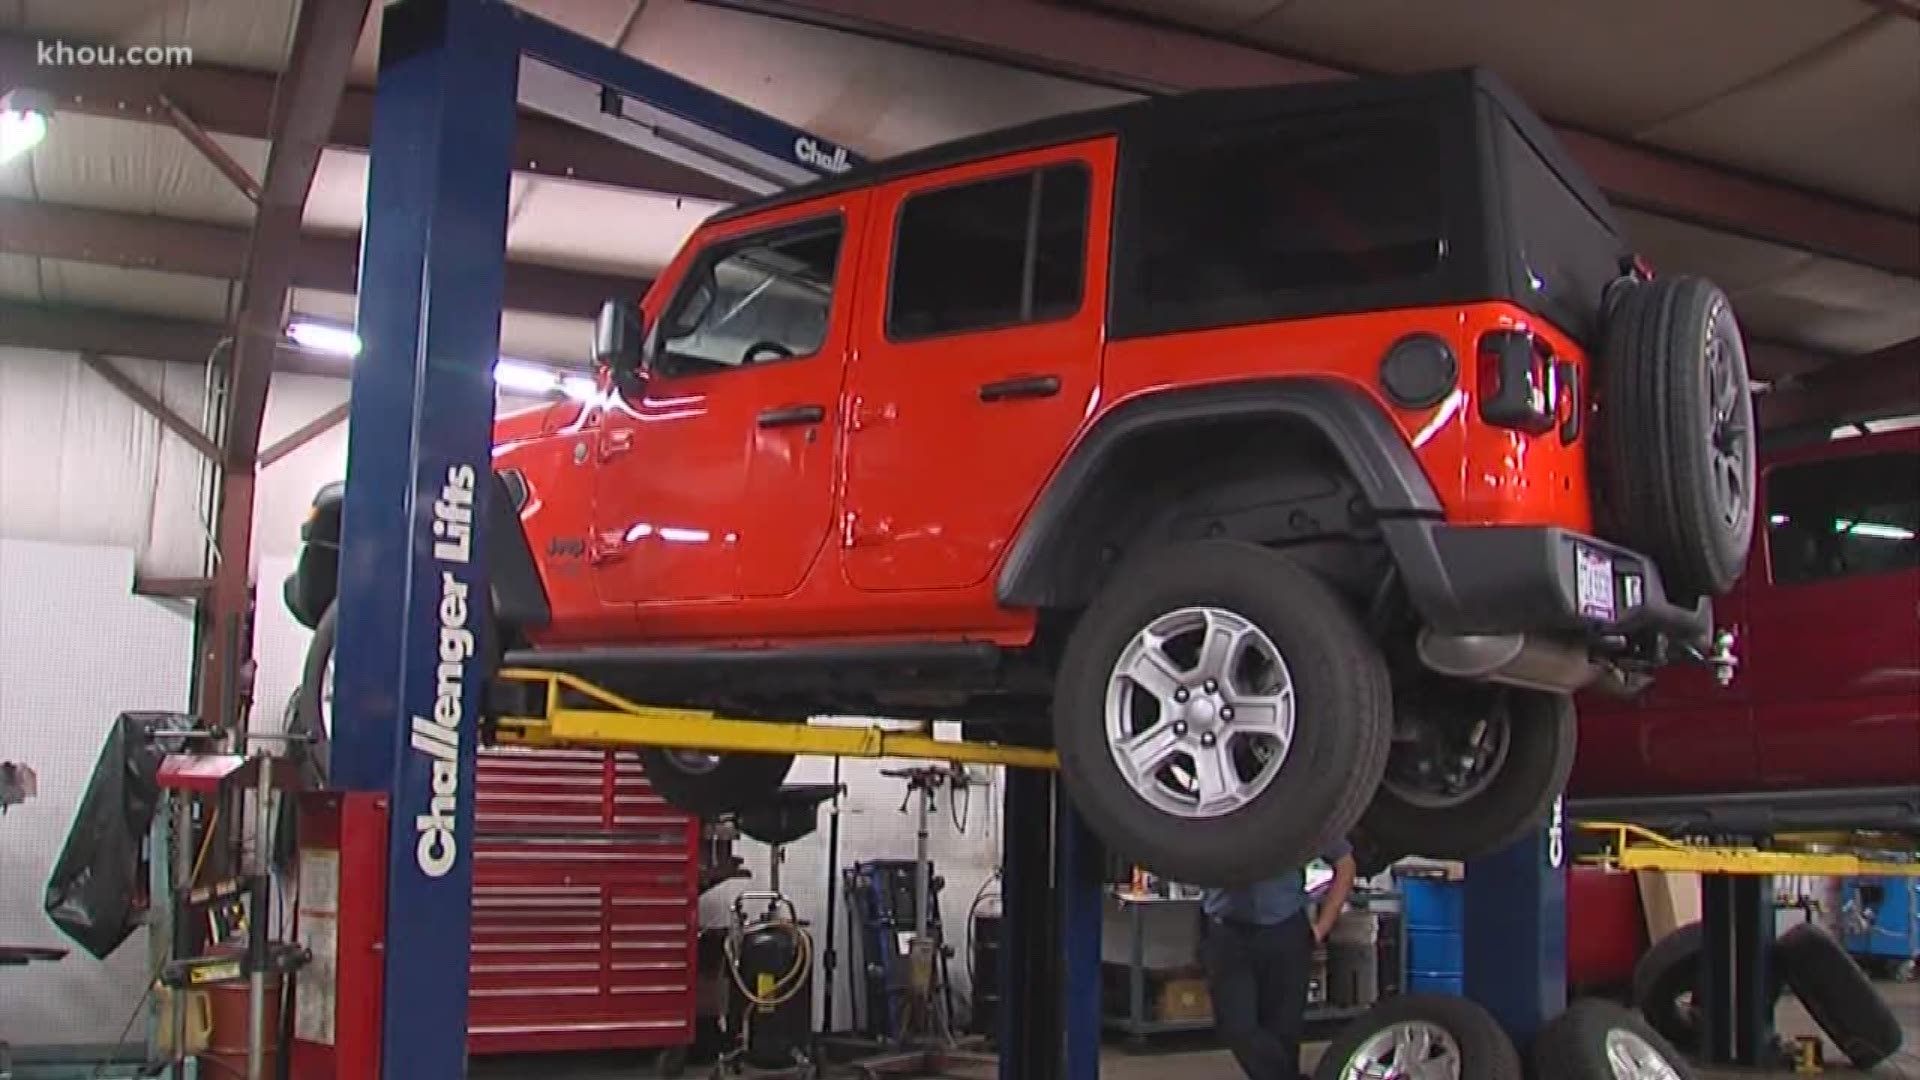 Lately a growing number of Jeep Wrangler owners have been raising questions about the welding on the frames under those vehicles.